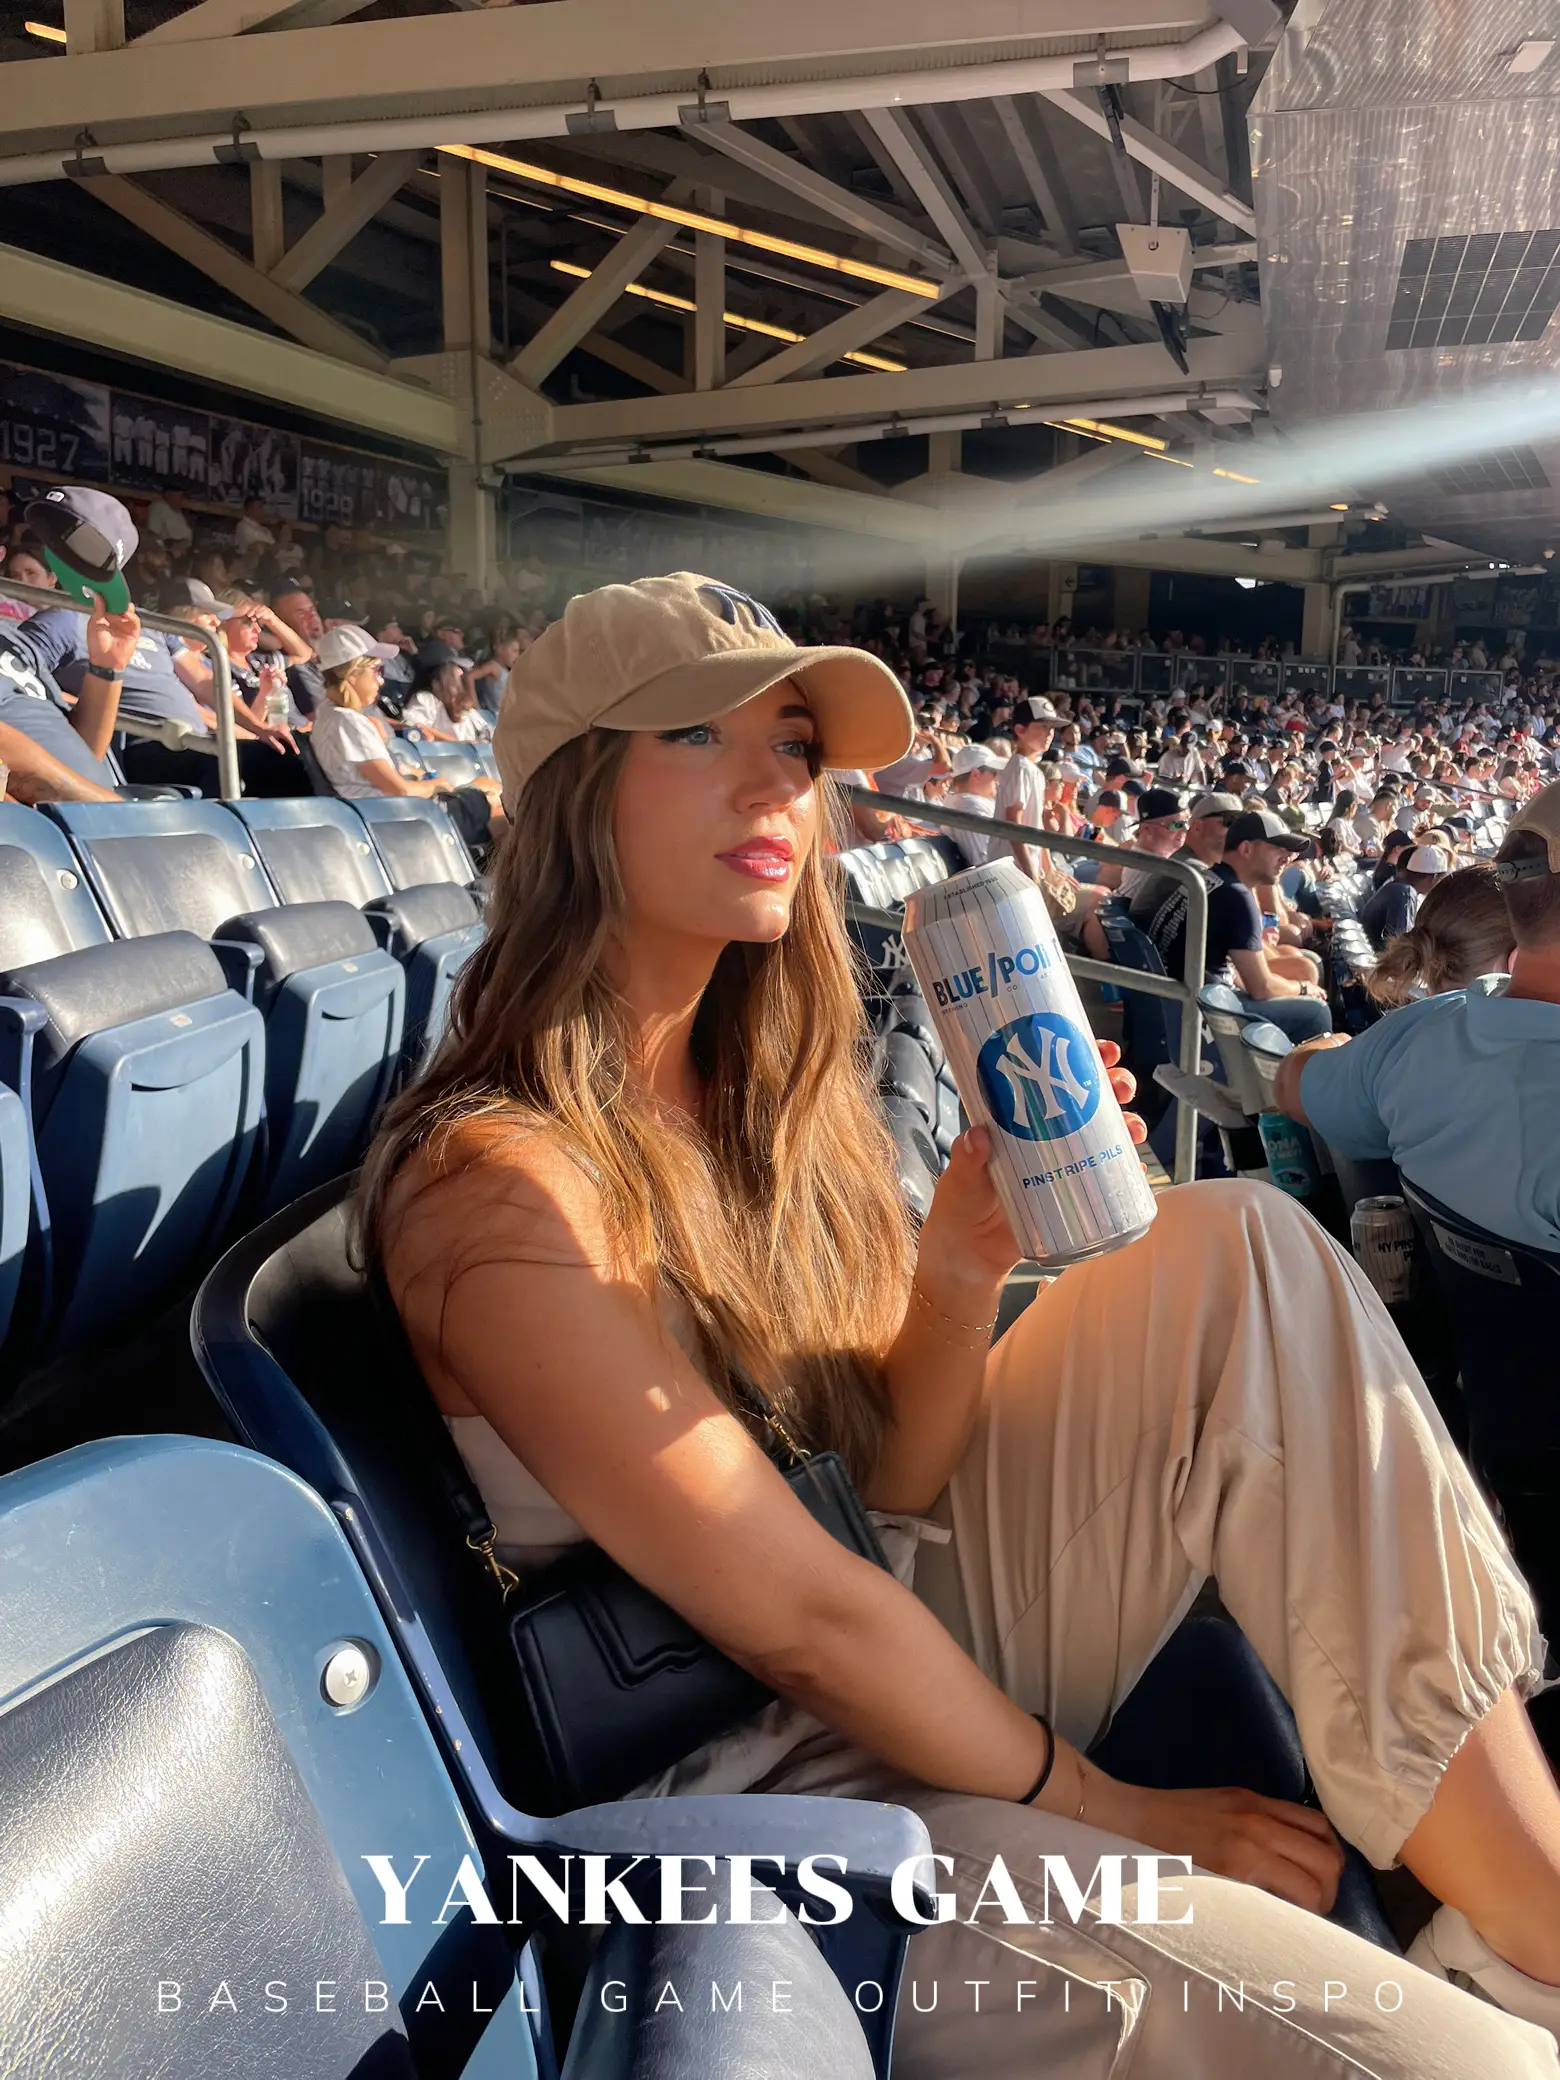 Yankees Game Outfit Inspo, Gallery posted by Kellyfrischmann